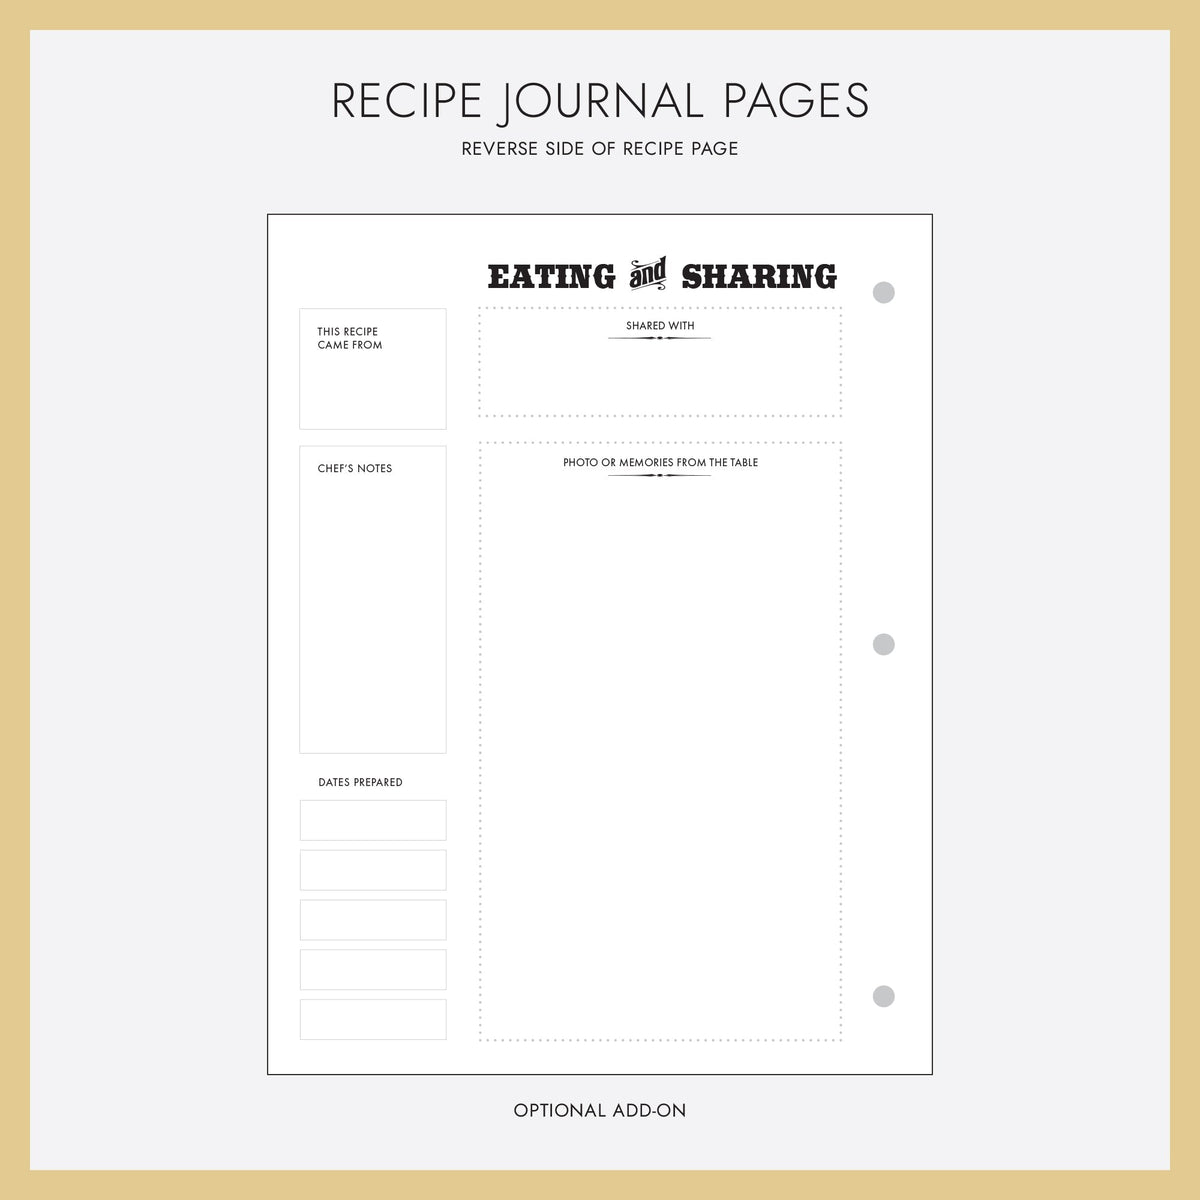 Recipe Journal Embossed with &quot;RECIPES&quot; covered with Pearl Leather